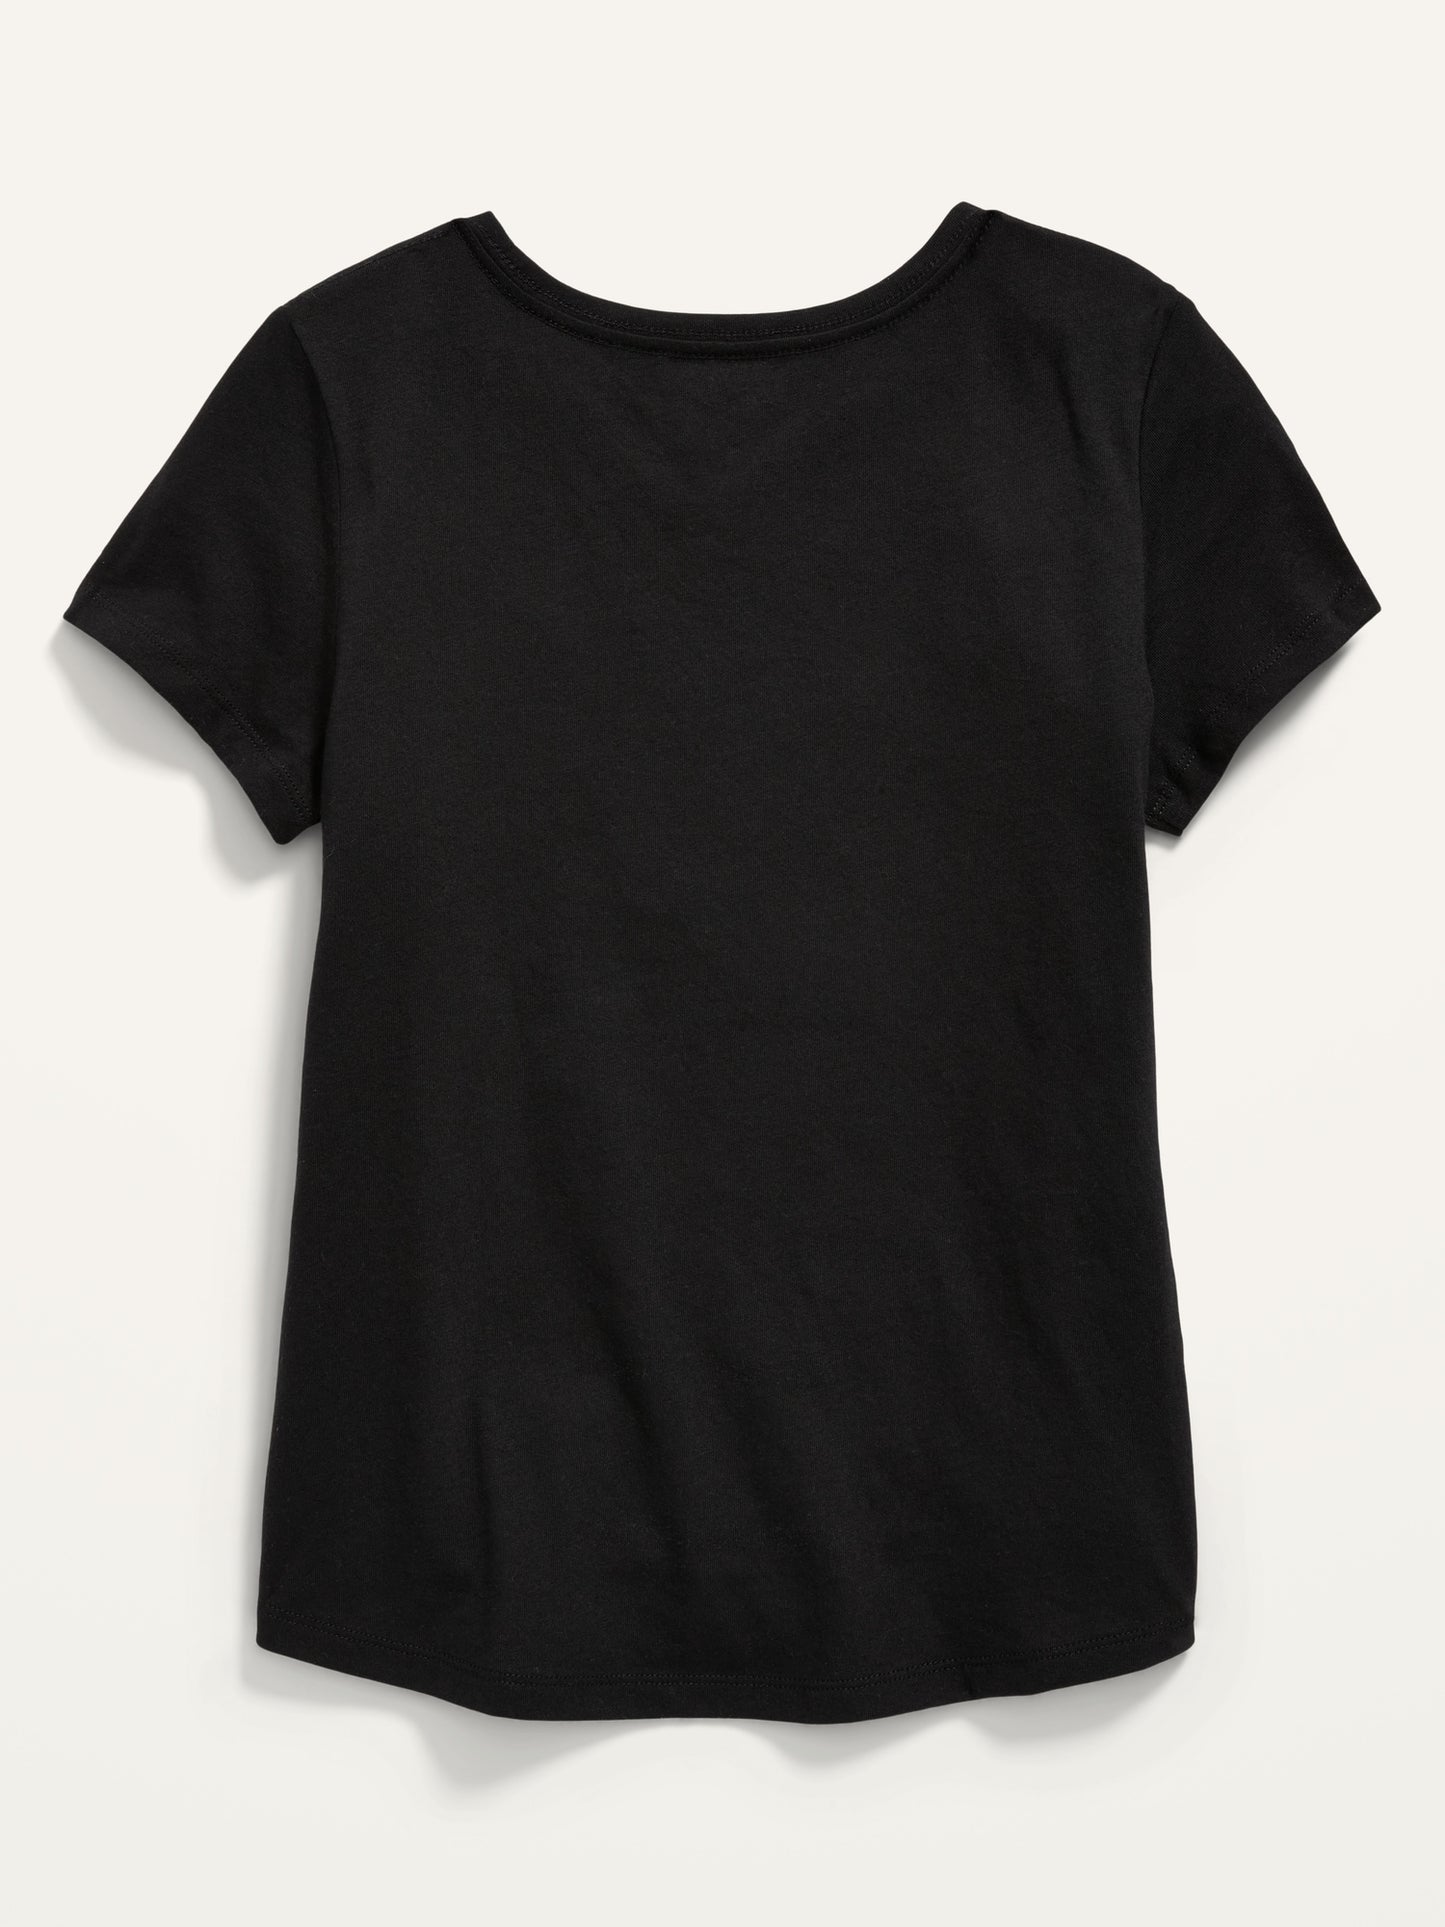 Short-Sleeve Softest Solid T-Shirt for Girls